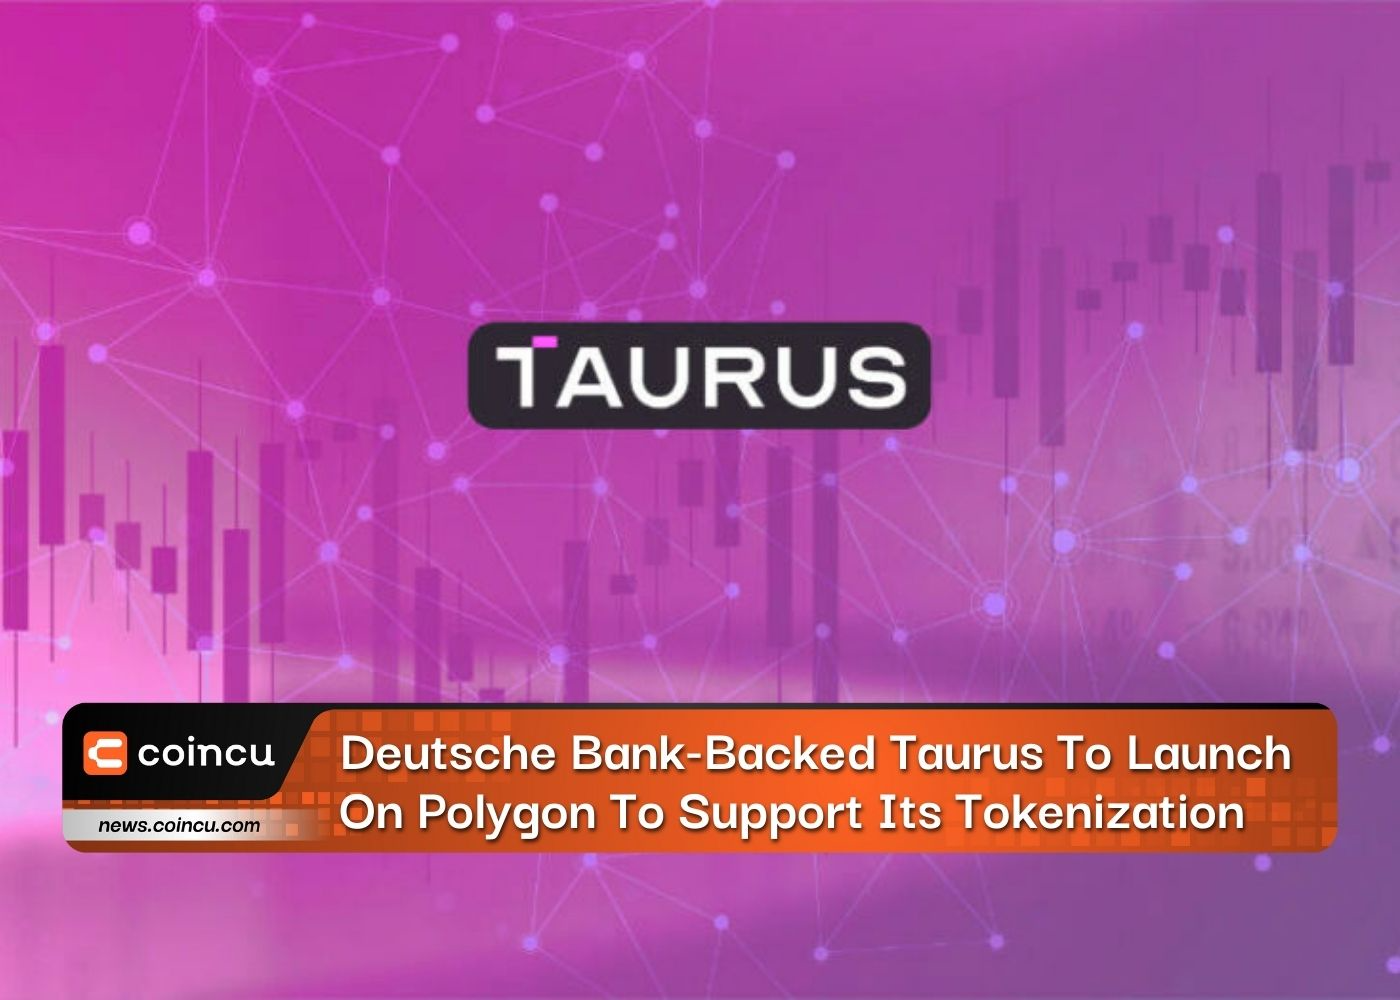 Deutsche Bank-Backed Taurus To Launch On Polygon To Support Its Tokenization